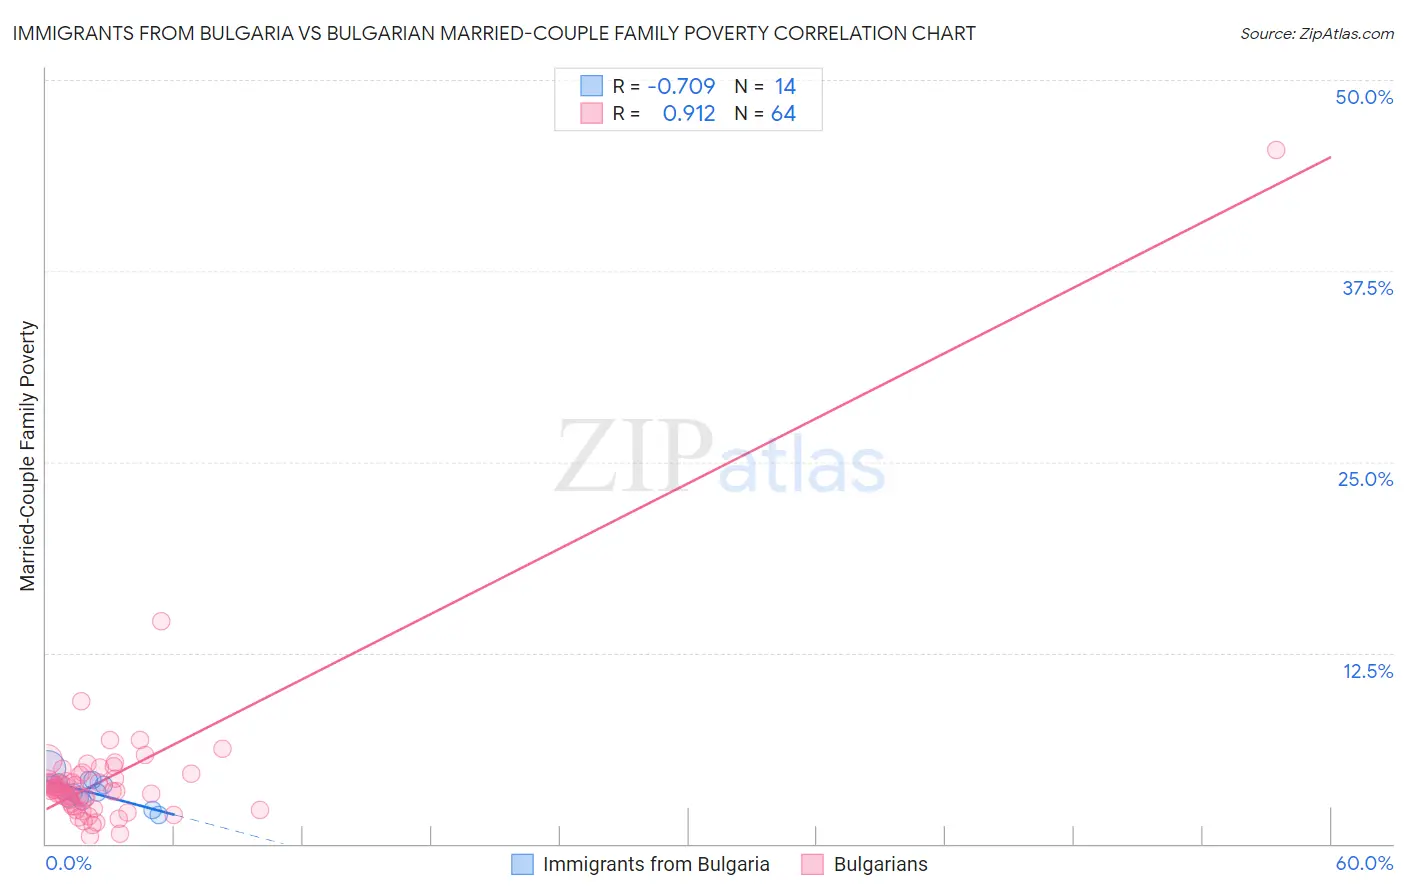 Immigrants from Bulgaria vs Bulgarian Married-Couple Family Poverty